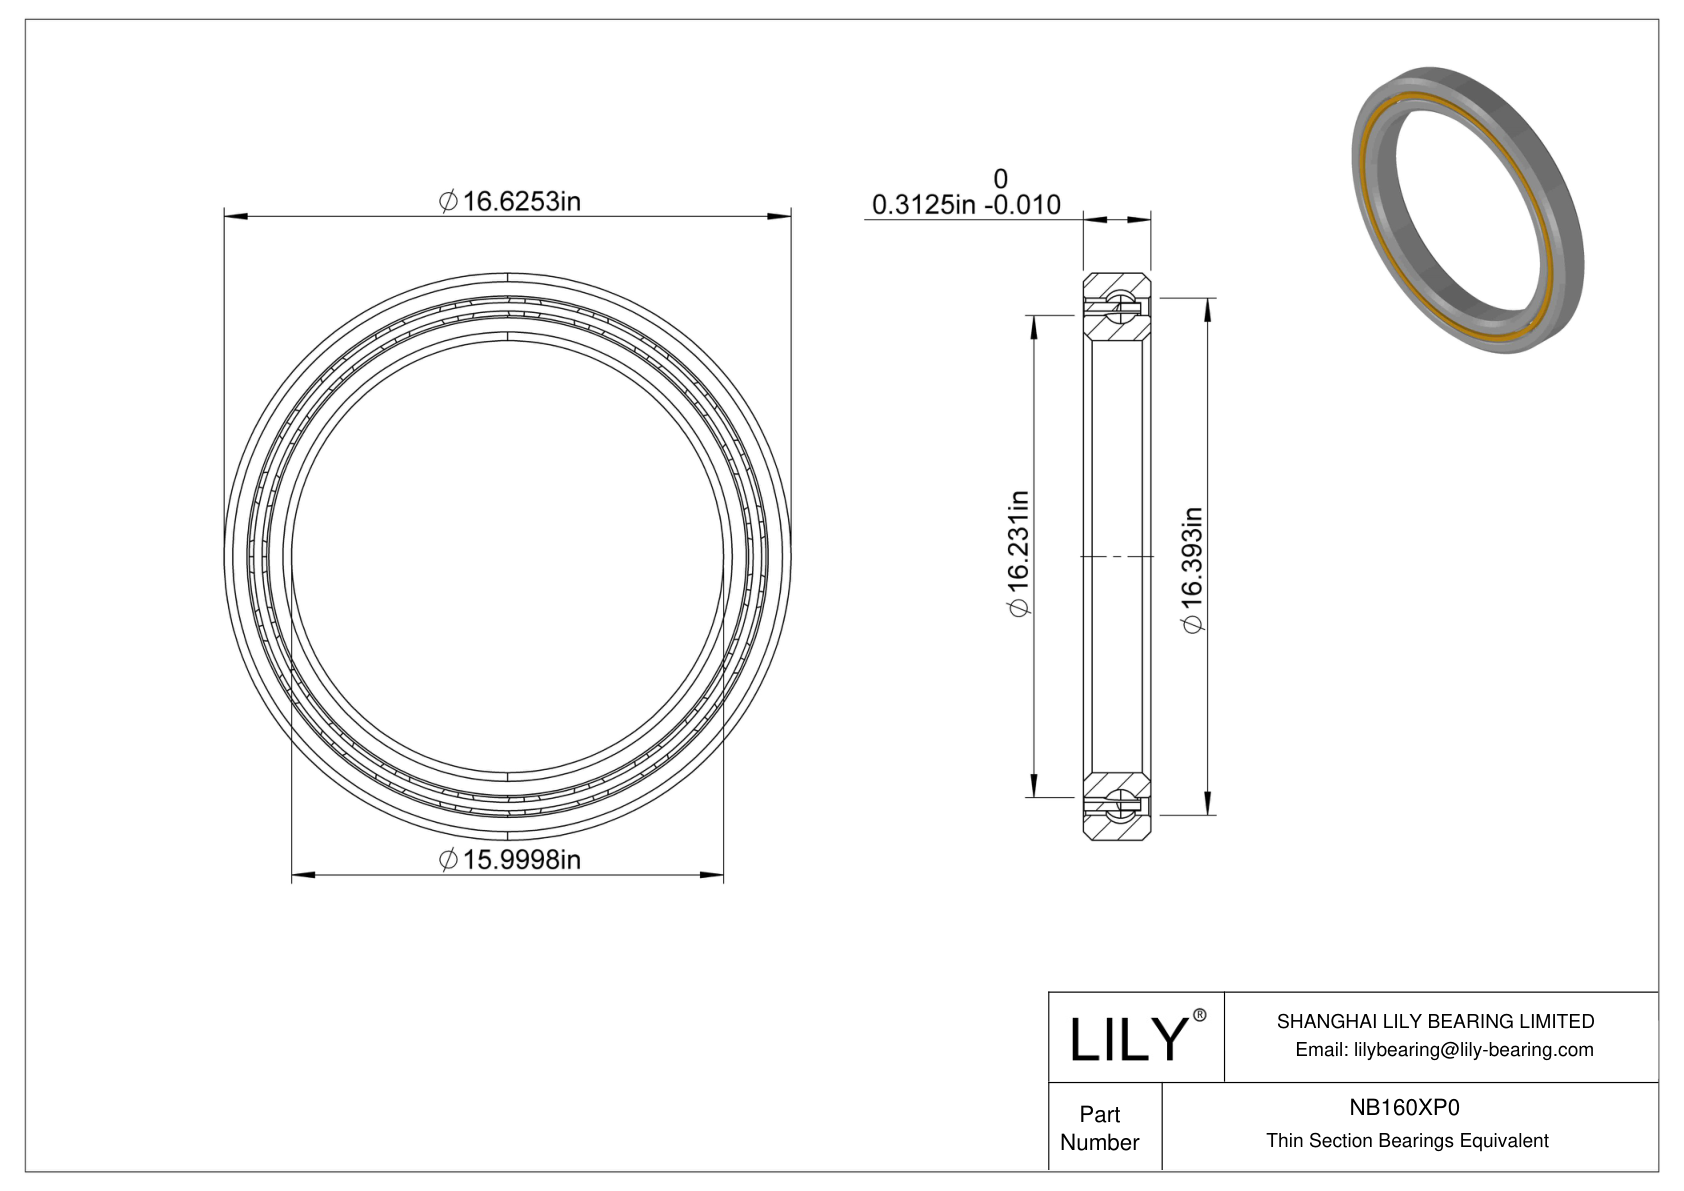 NB160XP0 Constant Section (CS) Bearings cad drawing